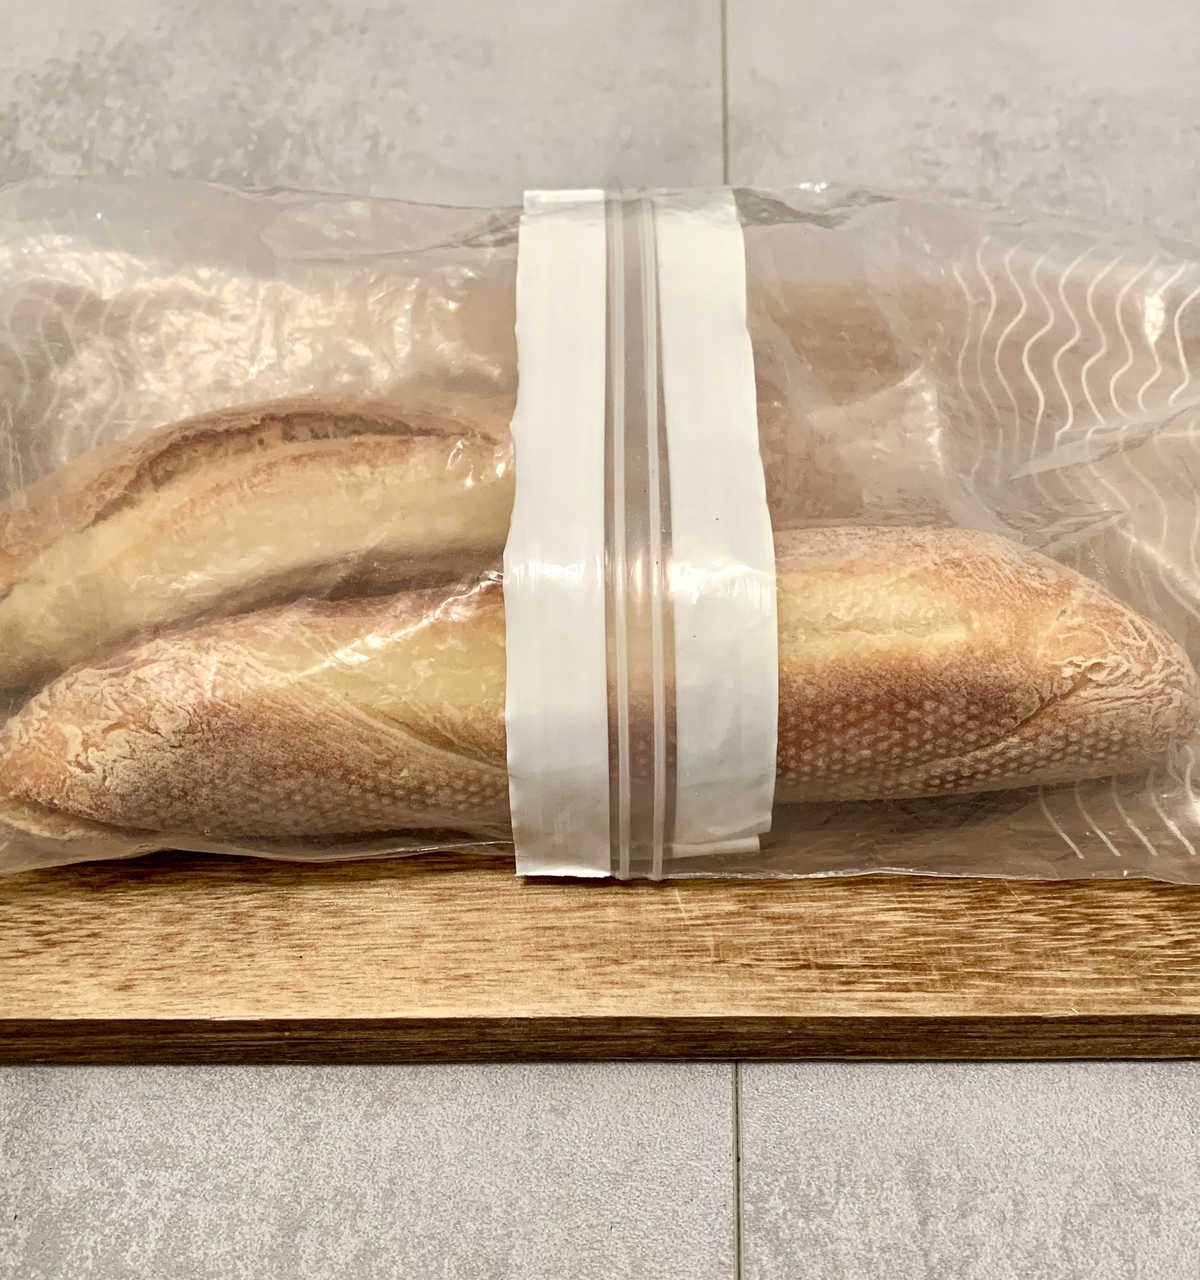 Use Two Bags to Store Larger Loaf of Bread